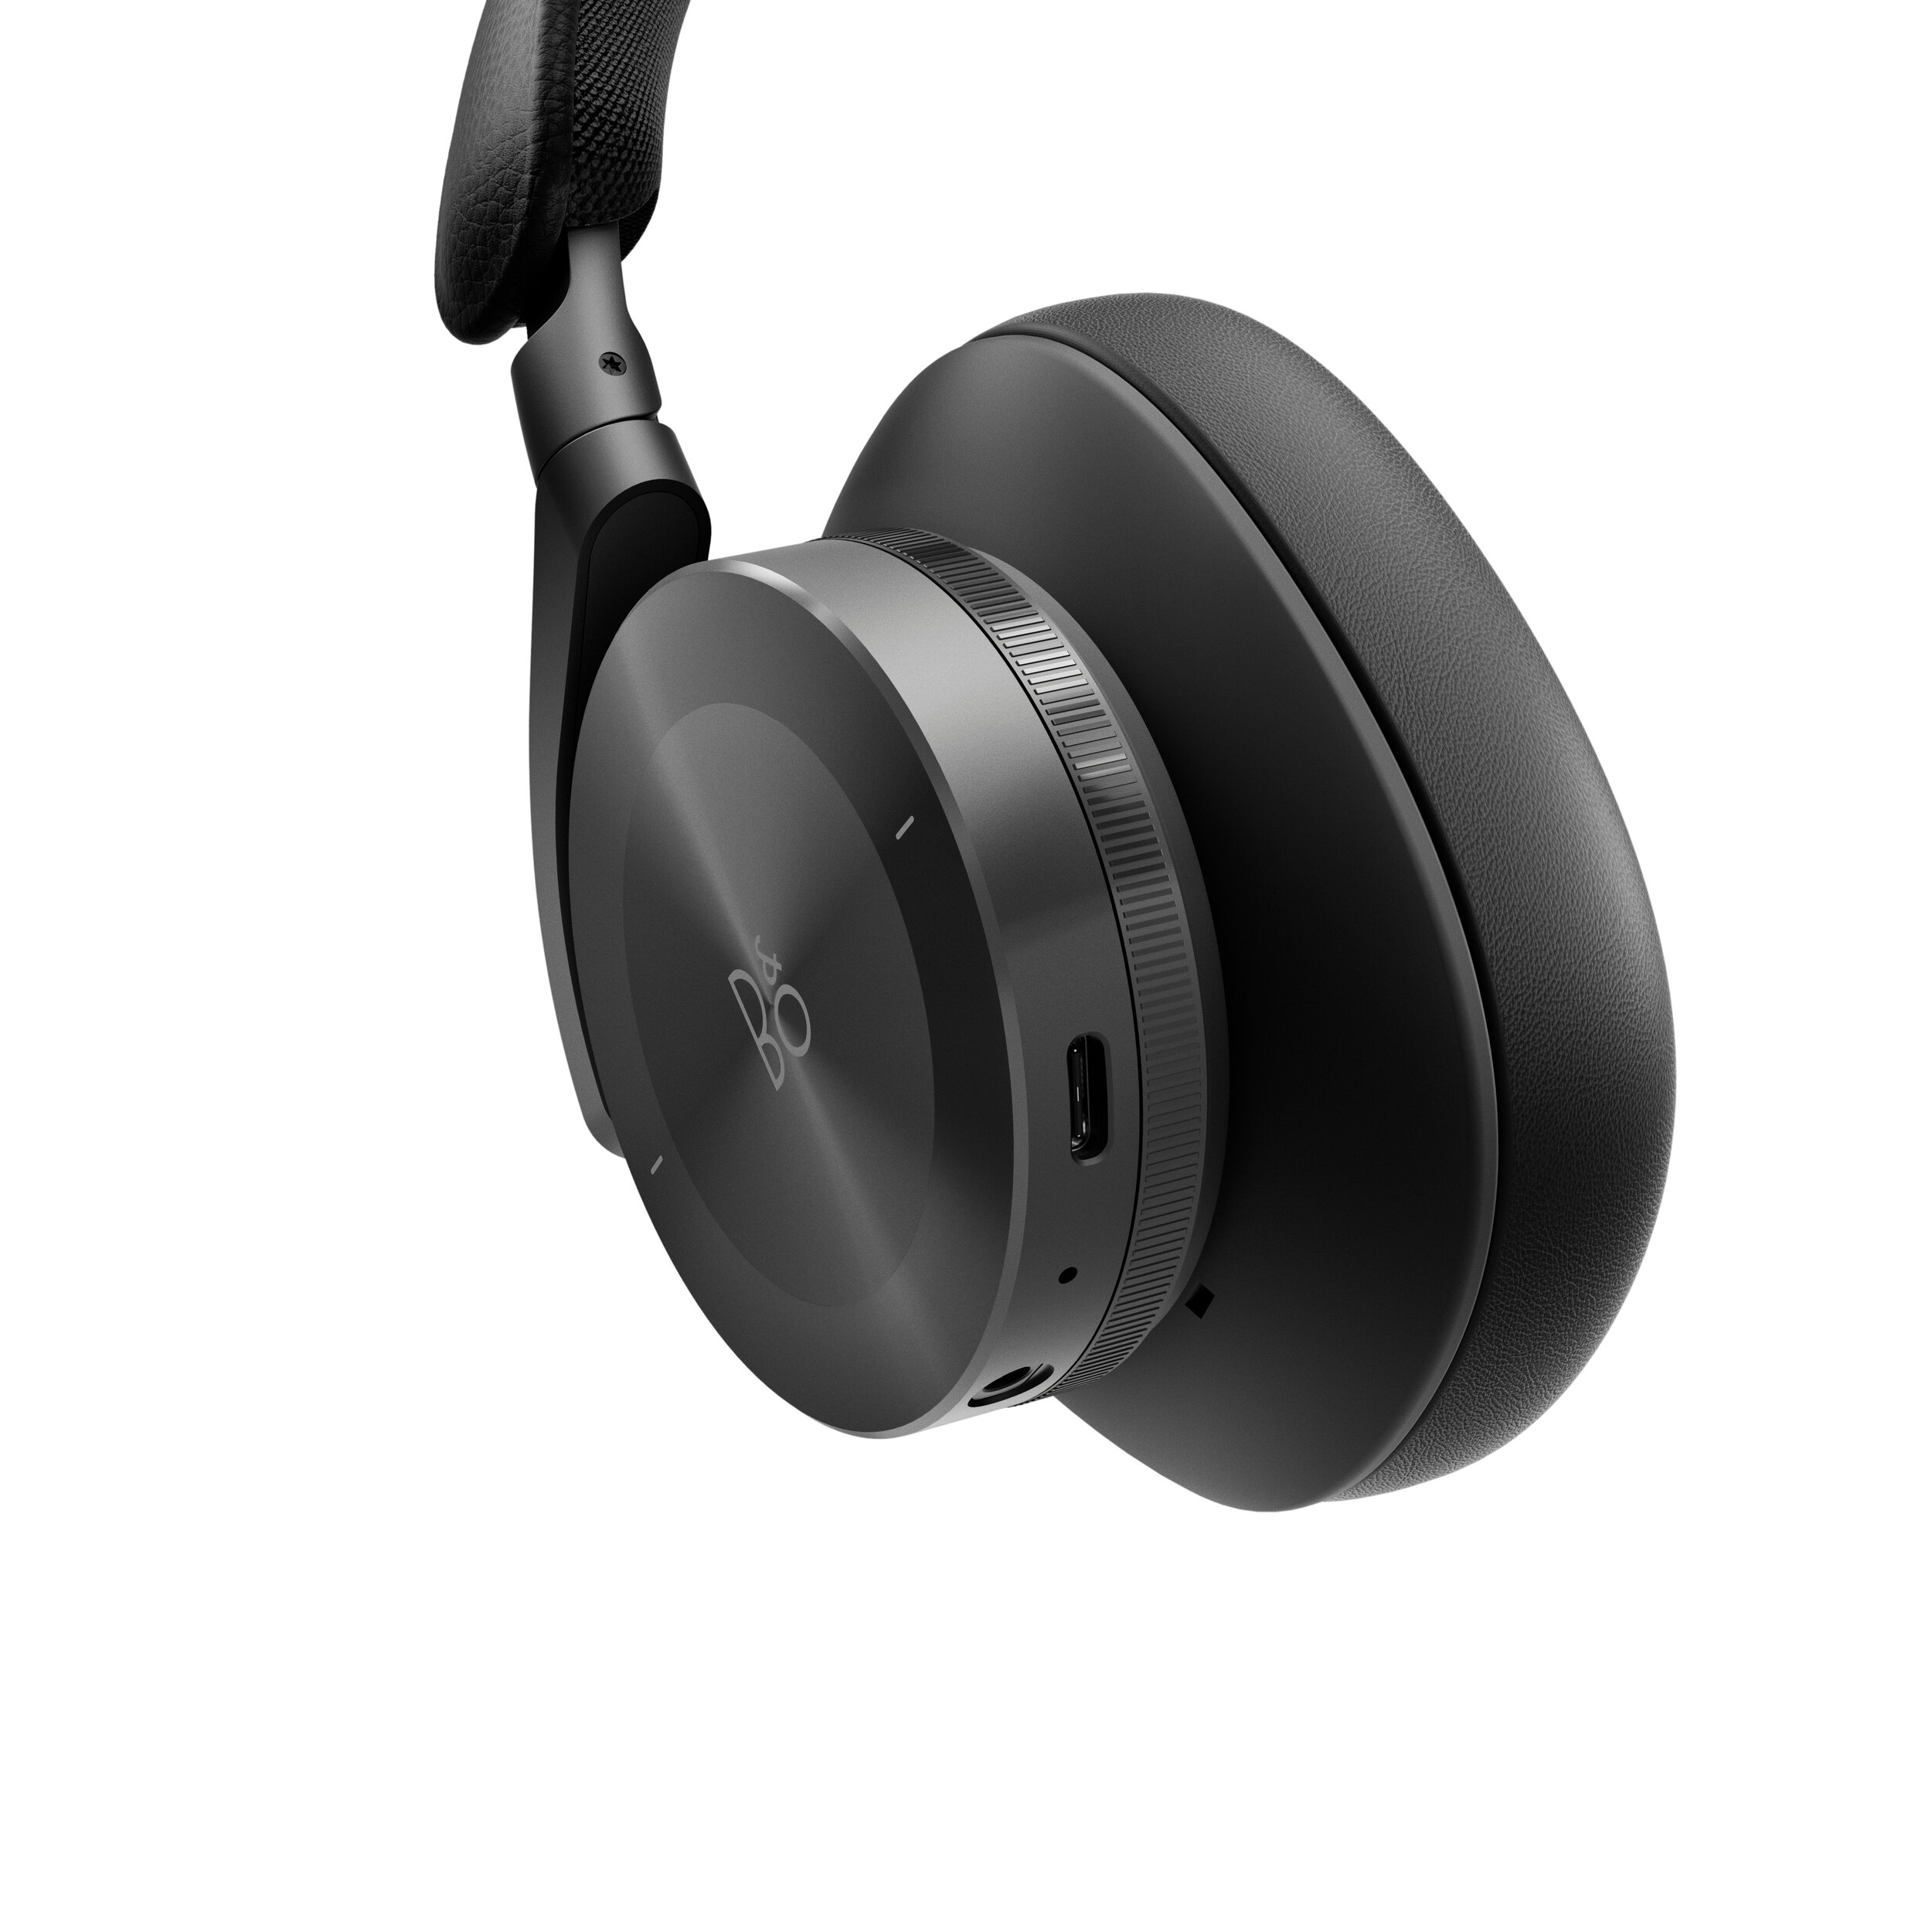 PS_Beoplay_H95_Black_Right-Front_Detail_1.tif.jpg